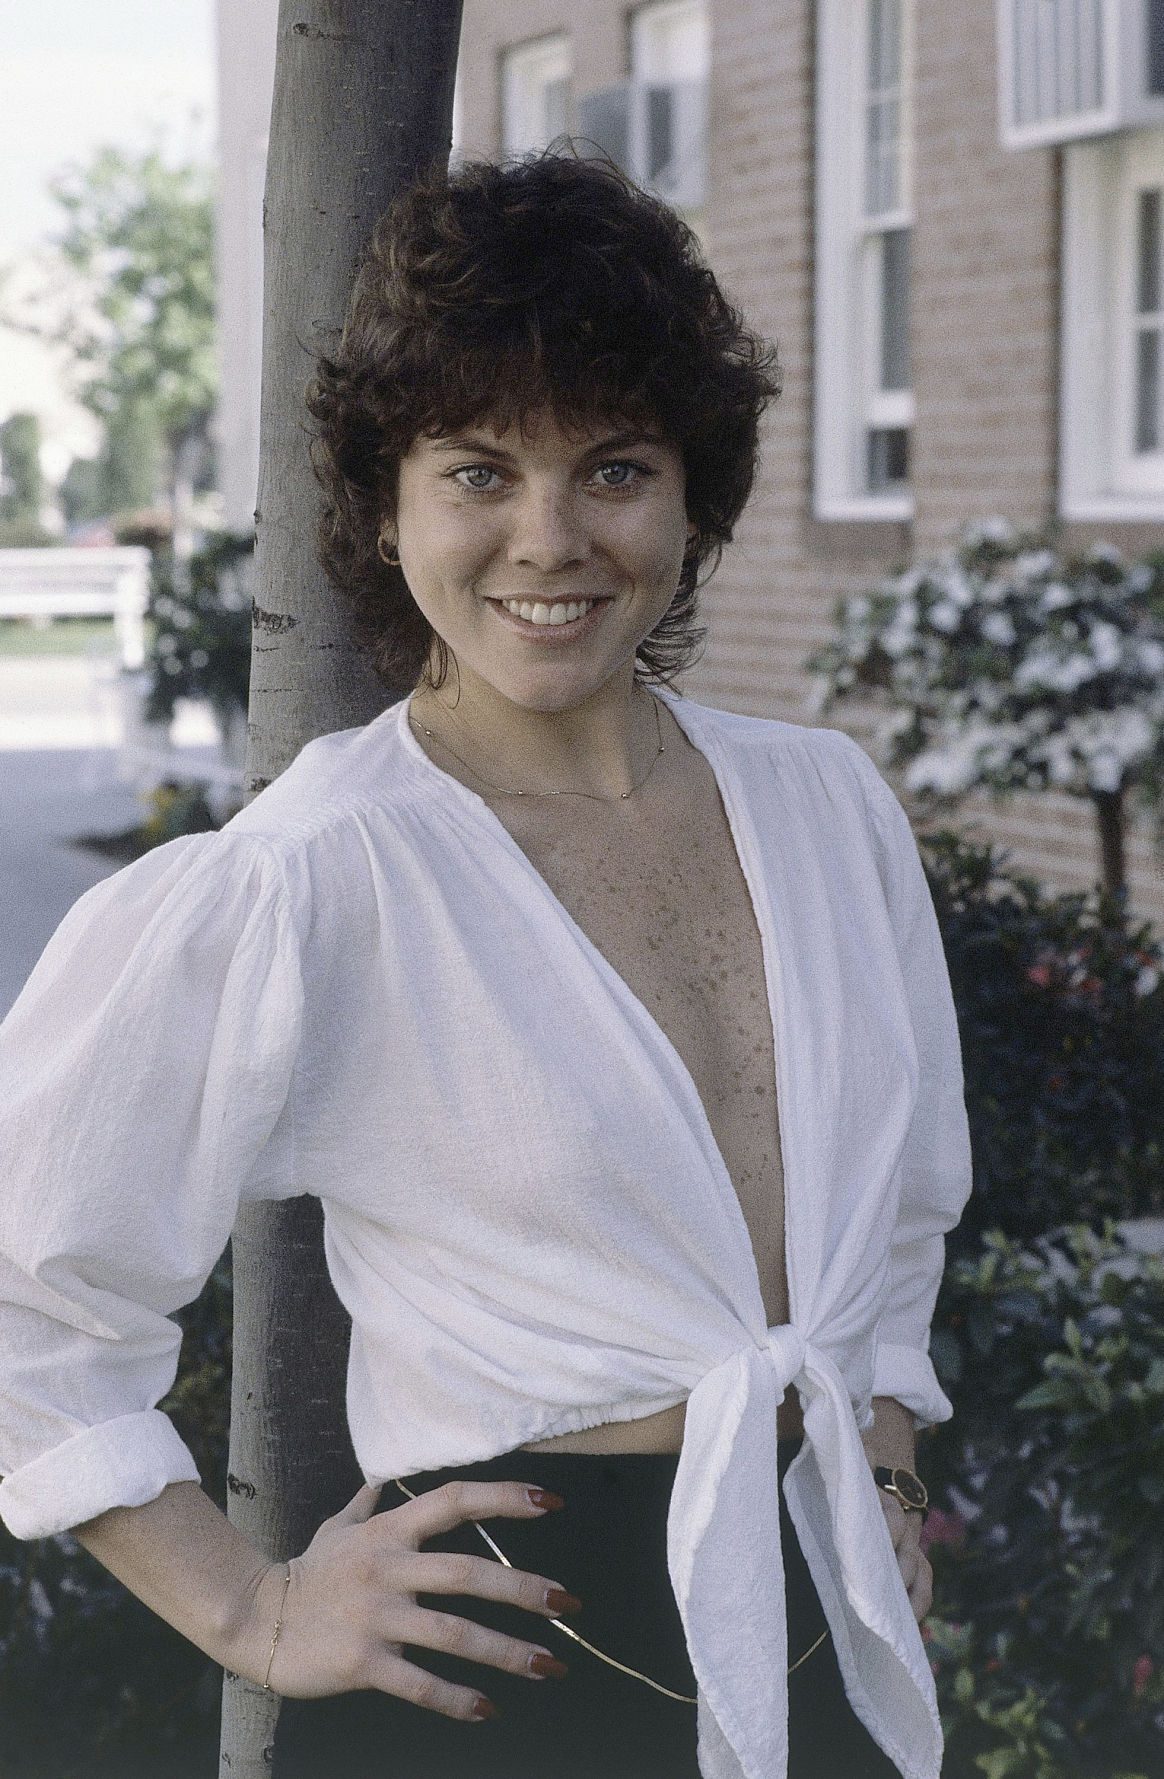 Erin Moran happy showing the freckles go all the way down